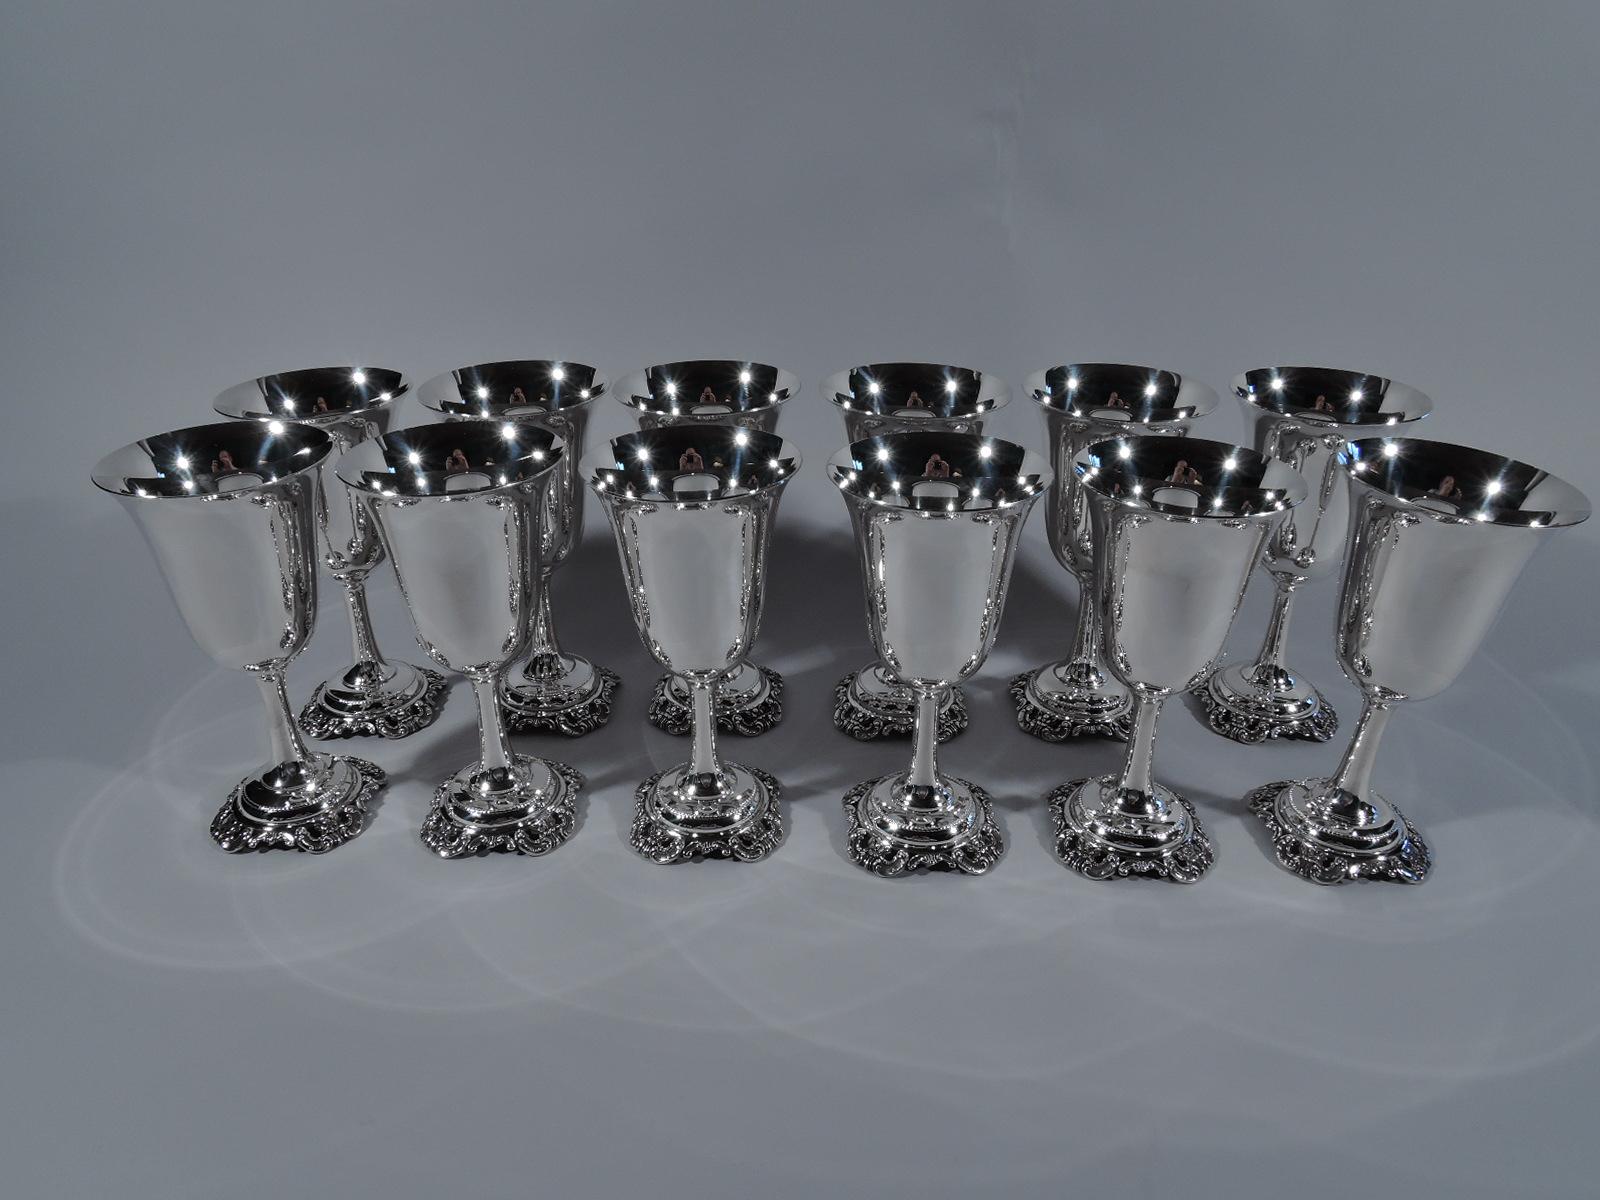 Set of 12 Grande Baroque sterling silver goblets. Made by Wallace in Wallingford, Conn. Each: Bell-form bowl on cylindrical stem on beaded and domed foot applied with open scroll and flower rim. Perfect for a special dinner in the cherished pattern